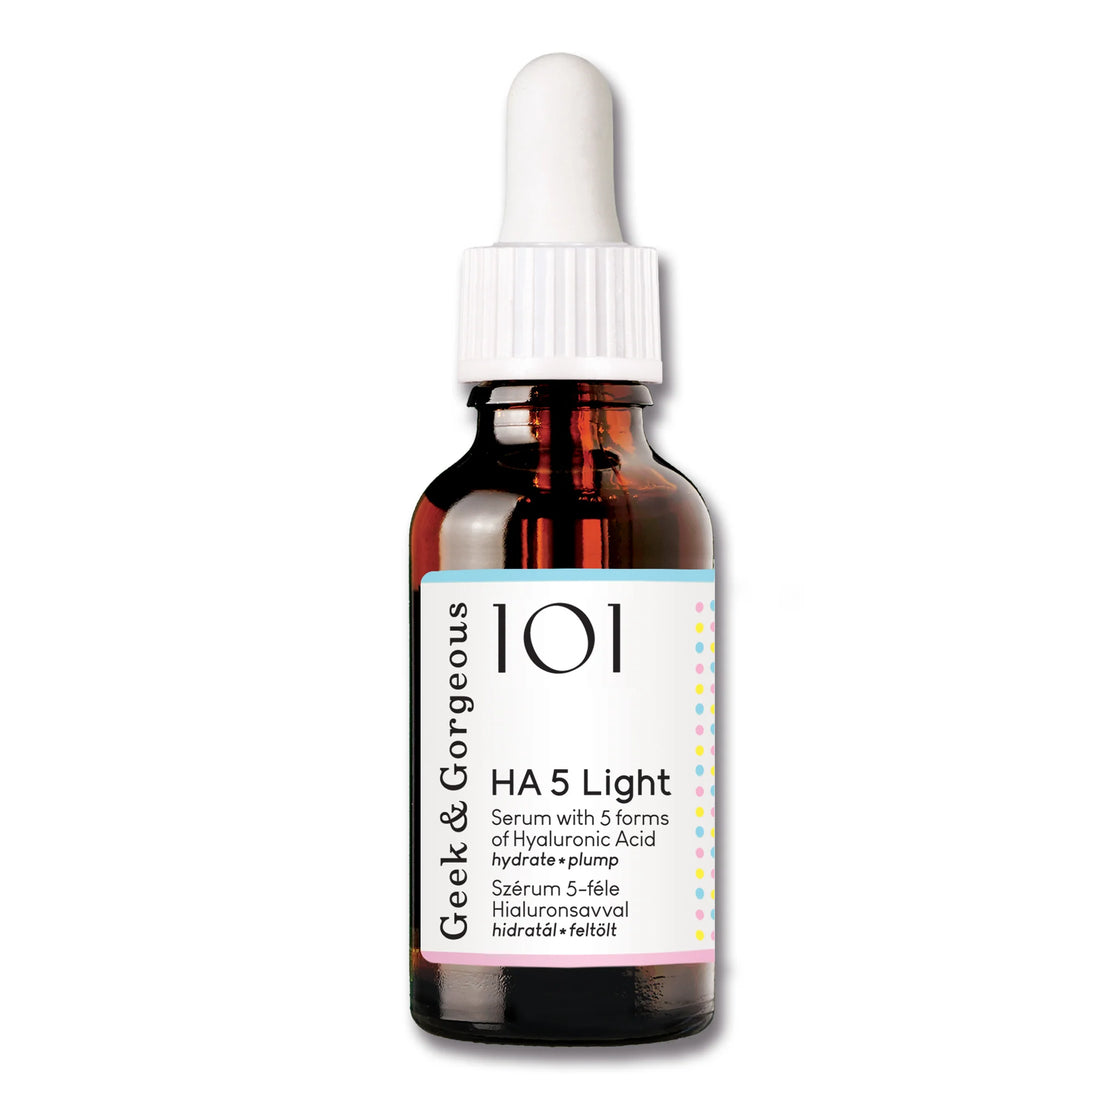 HA 5 Light Serum with 5 Forms of Hyaluronic Acid